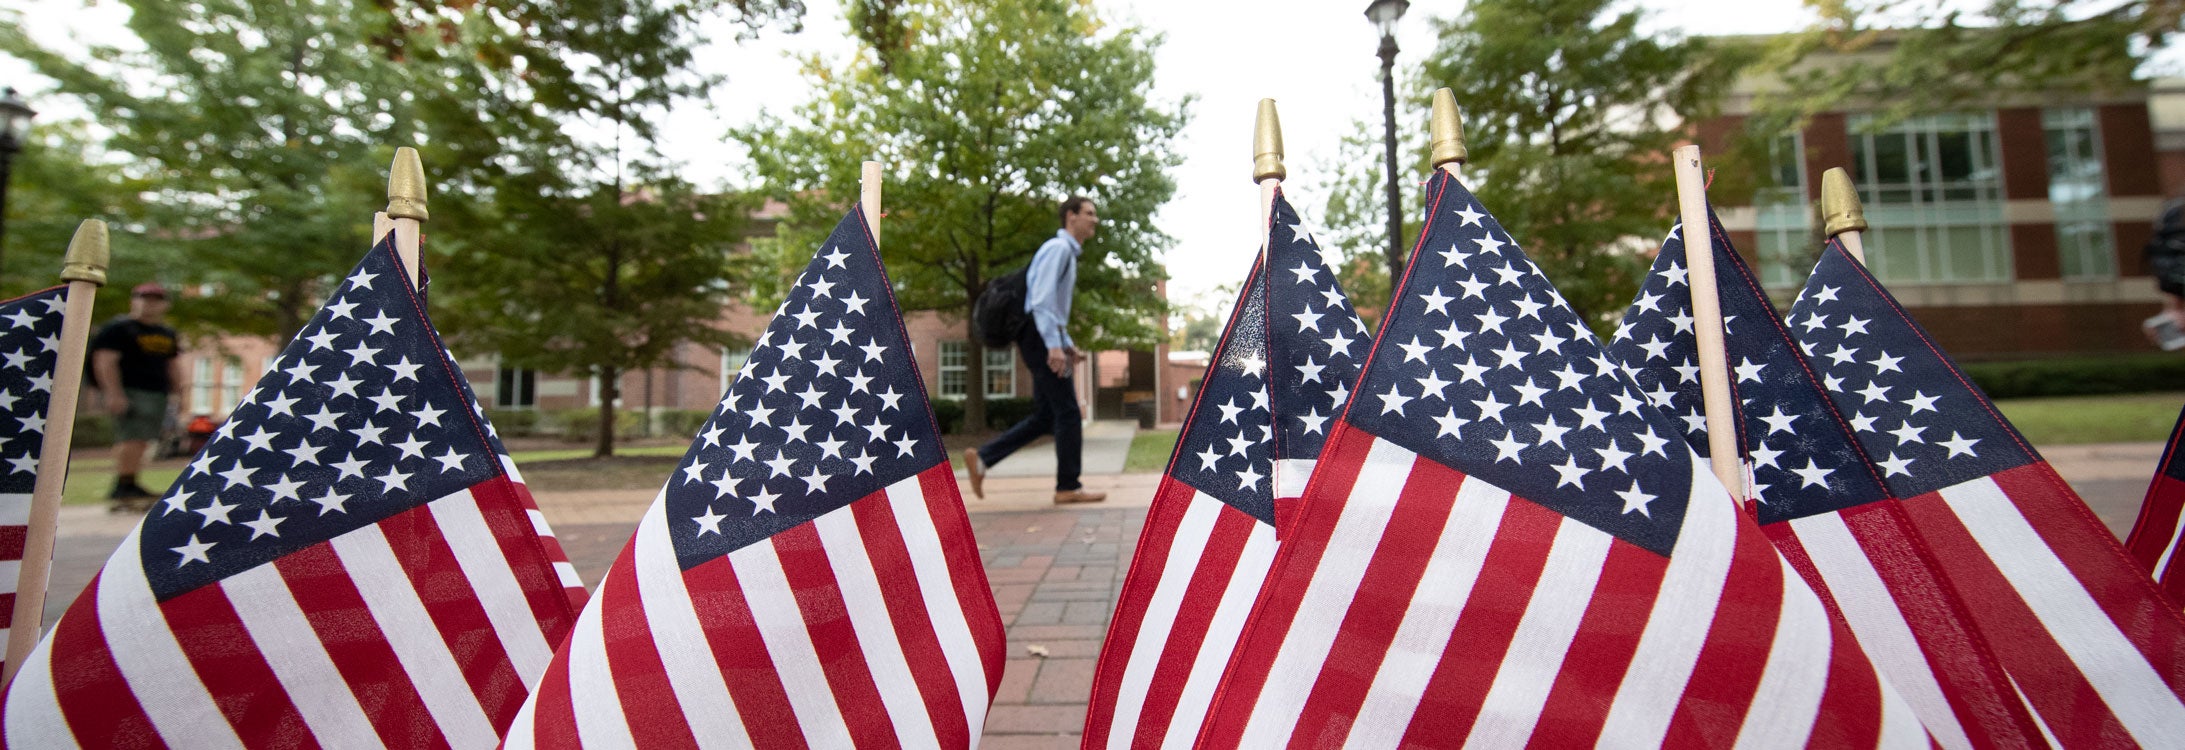 American flags on campus Mall by Joyner library